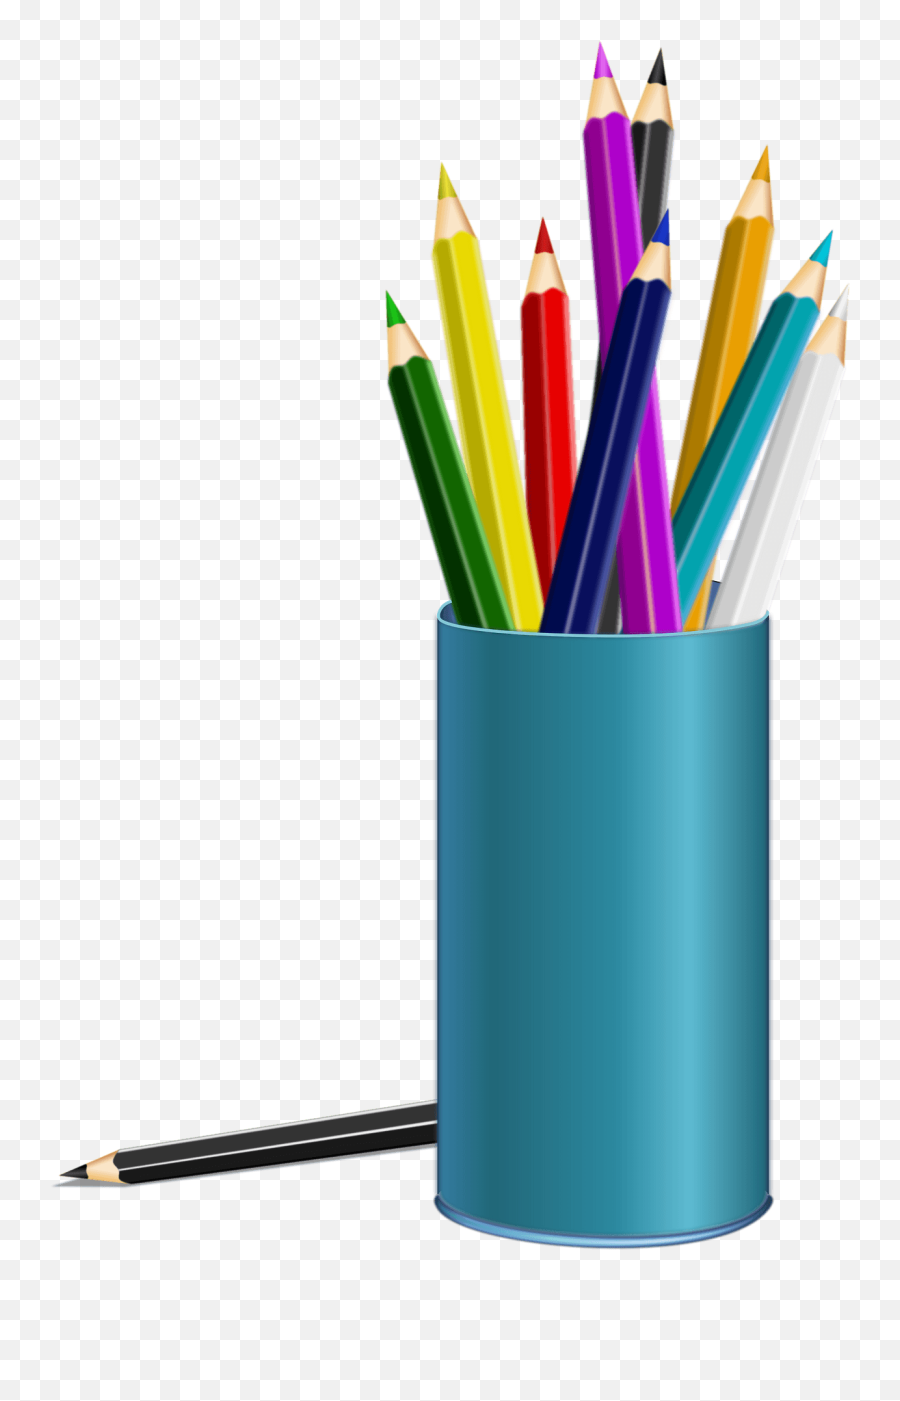 Blue Cup Filled With Color Pencils - Clipart A Pencil Holder Emoji,Pencil Clipart